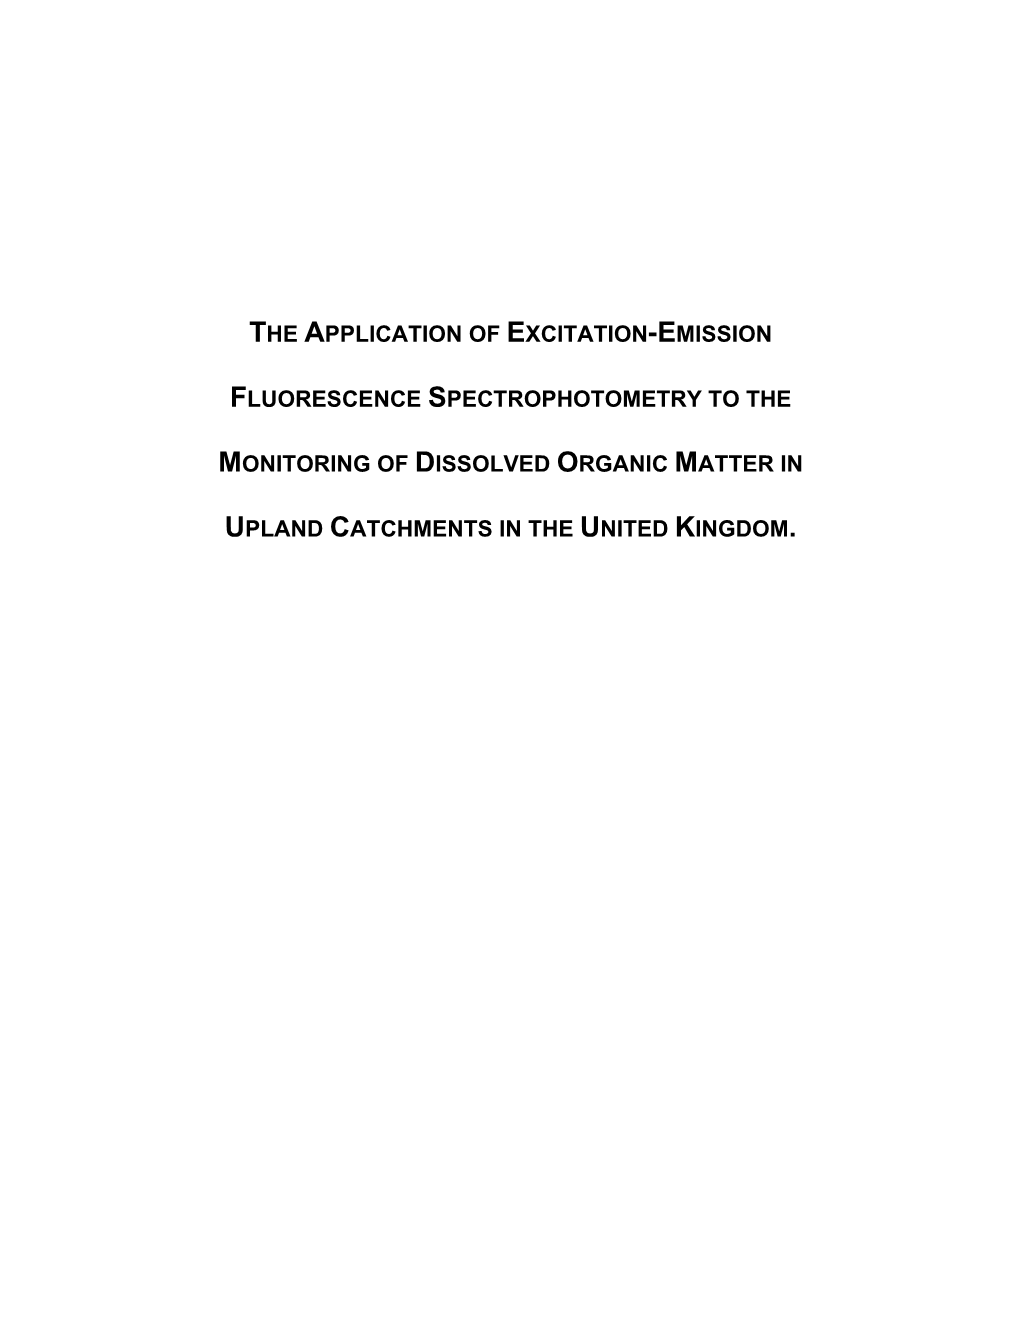 The Application of Excitation-Emission